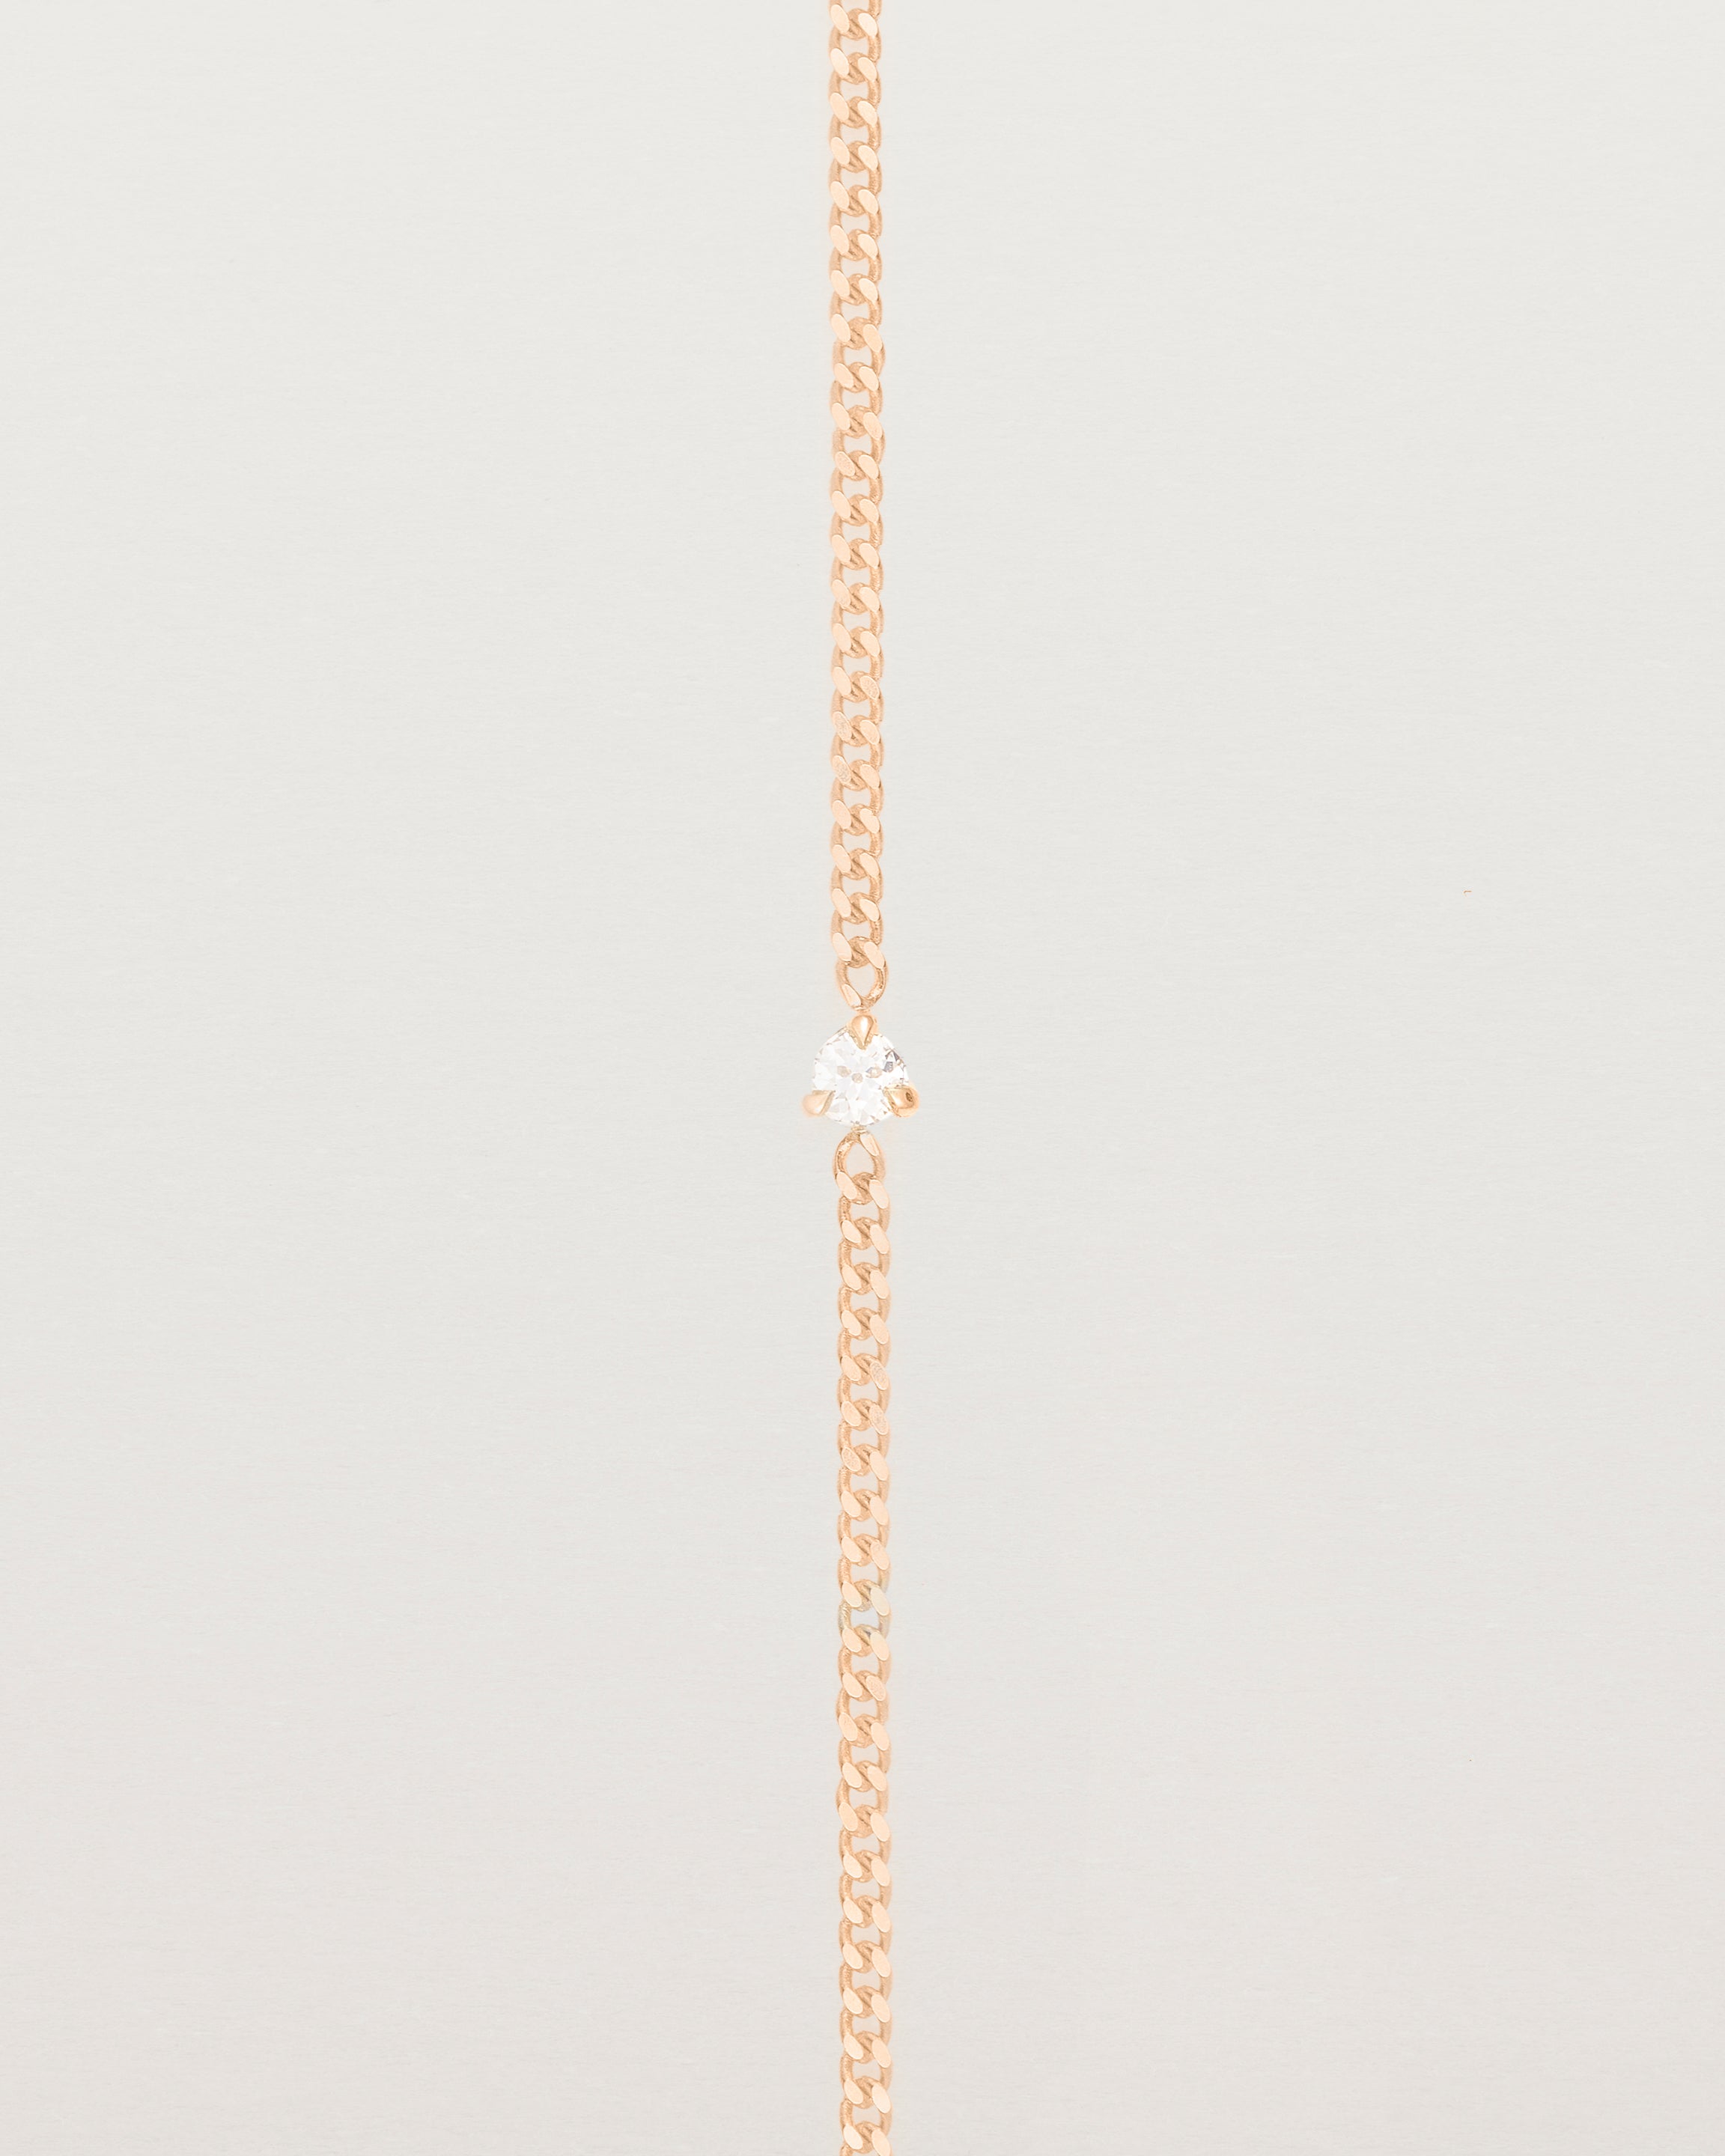 A rose gold chain bracelet featuring a single white old cut diamond